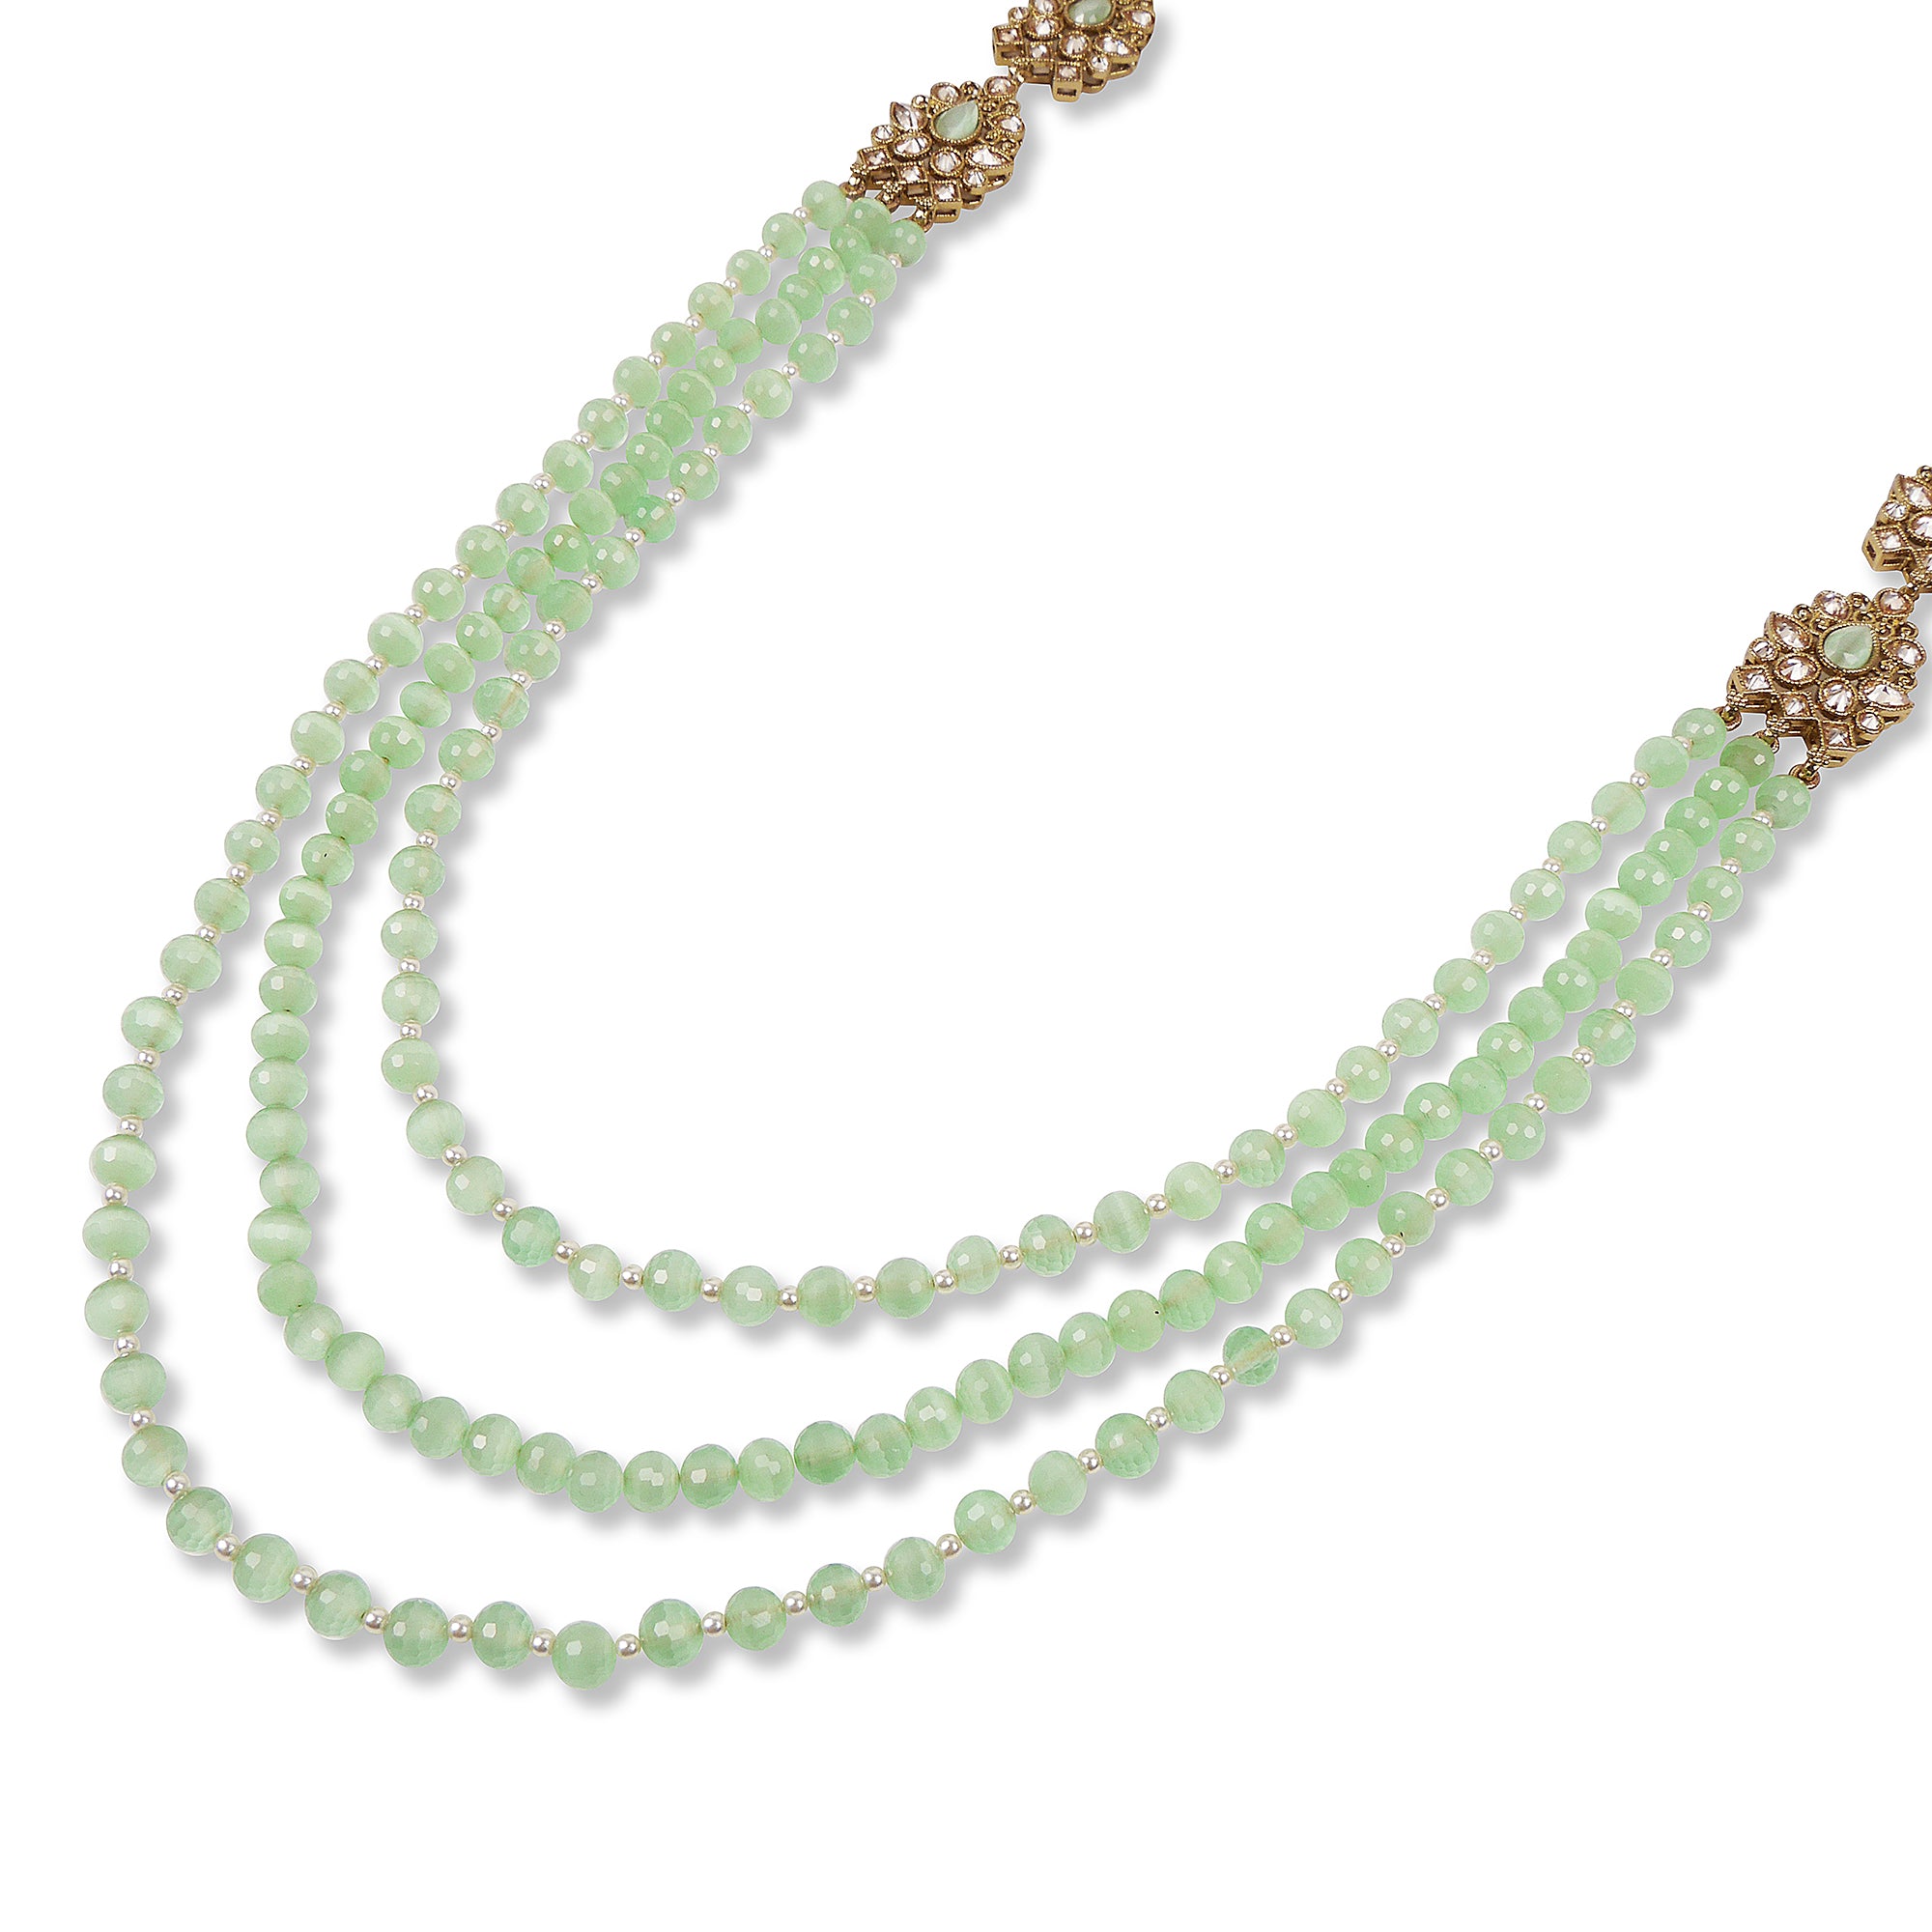 Nihira Layered Long Necklace in Mint and Antique Gold